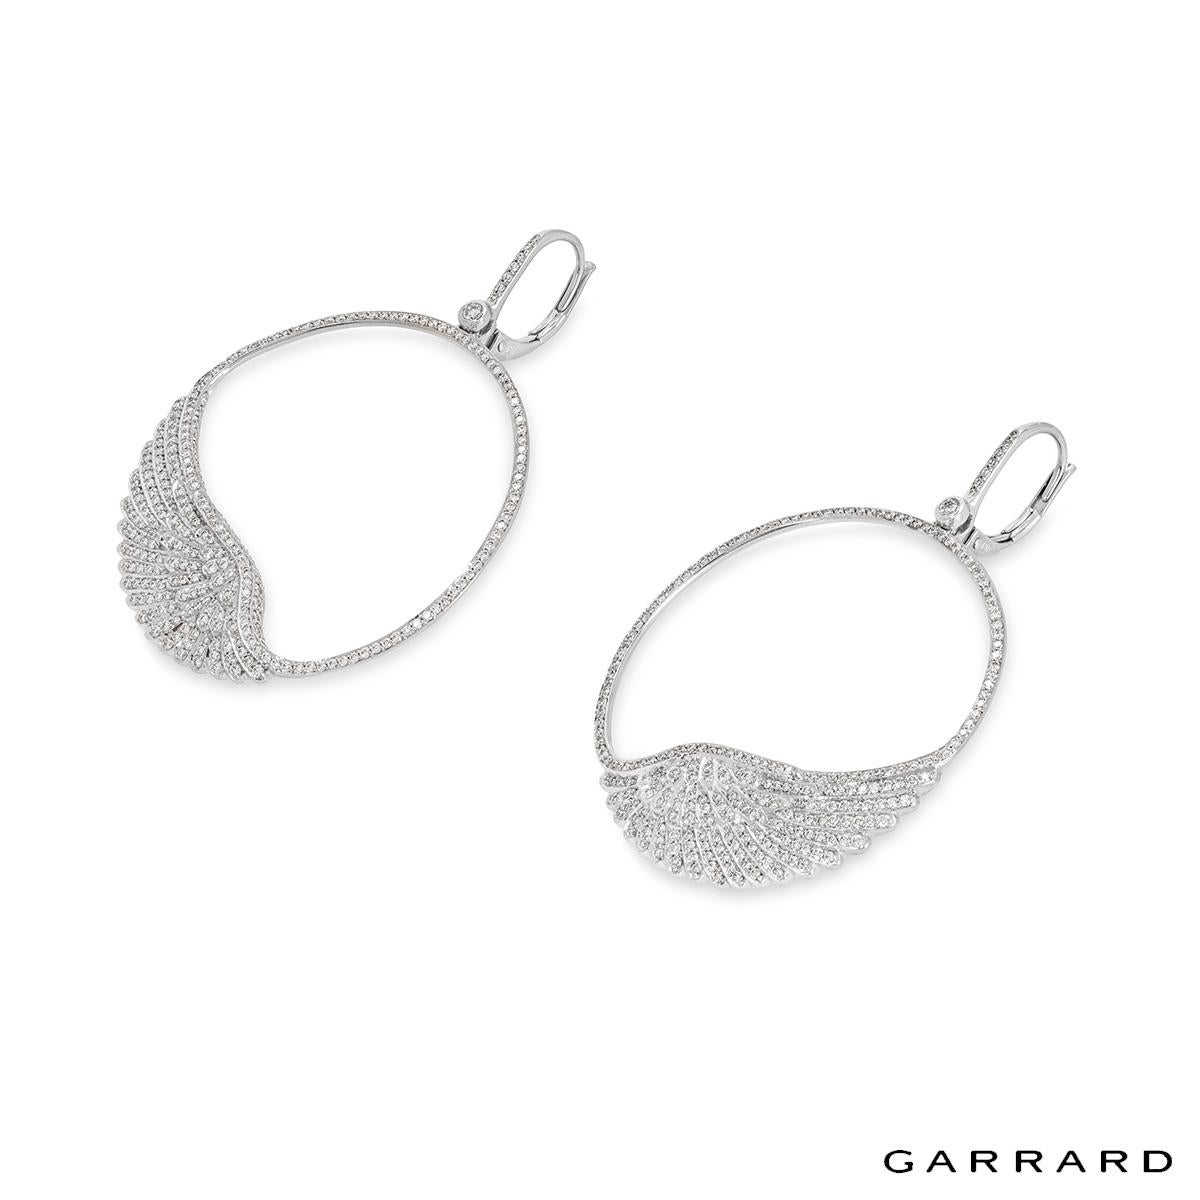 A spectacular pair of white gold diamond earrings by Garrard from the Wings Classic collection. The earrings each feature a diamond set half hoop that leads to a diamond set circular motif with an angel wing talisman at the bottom. The 564 round